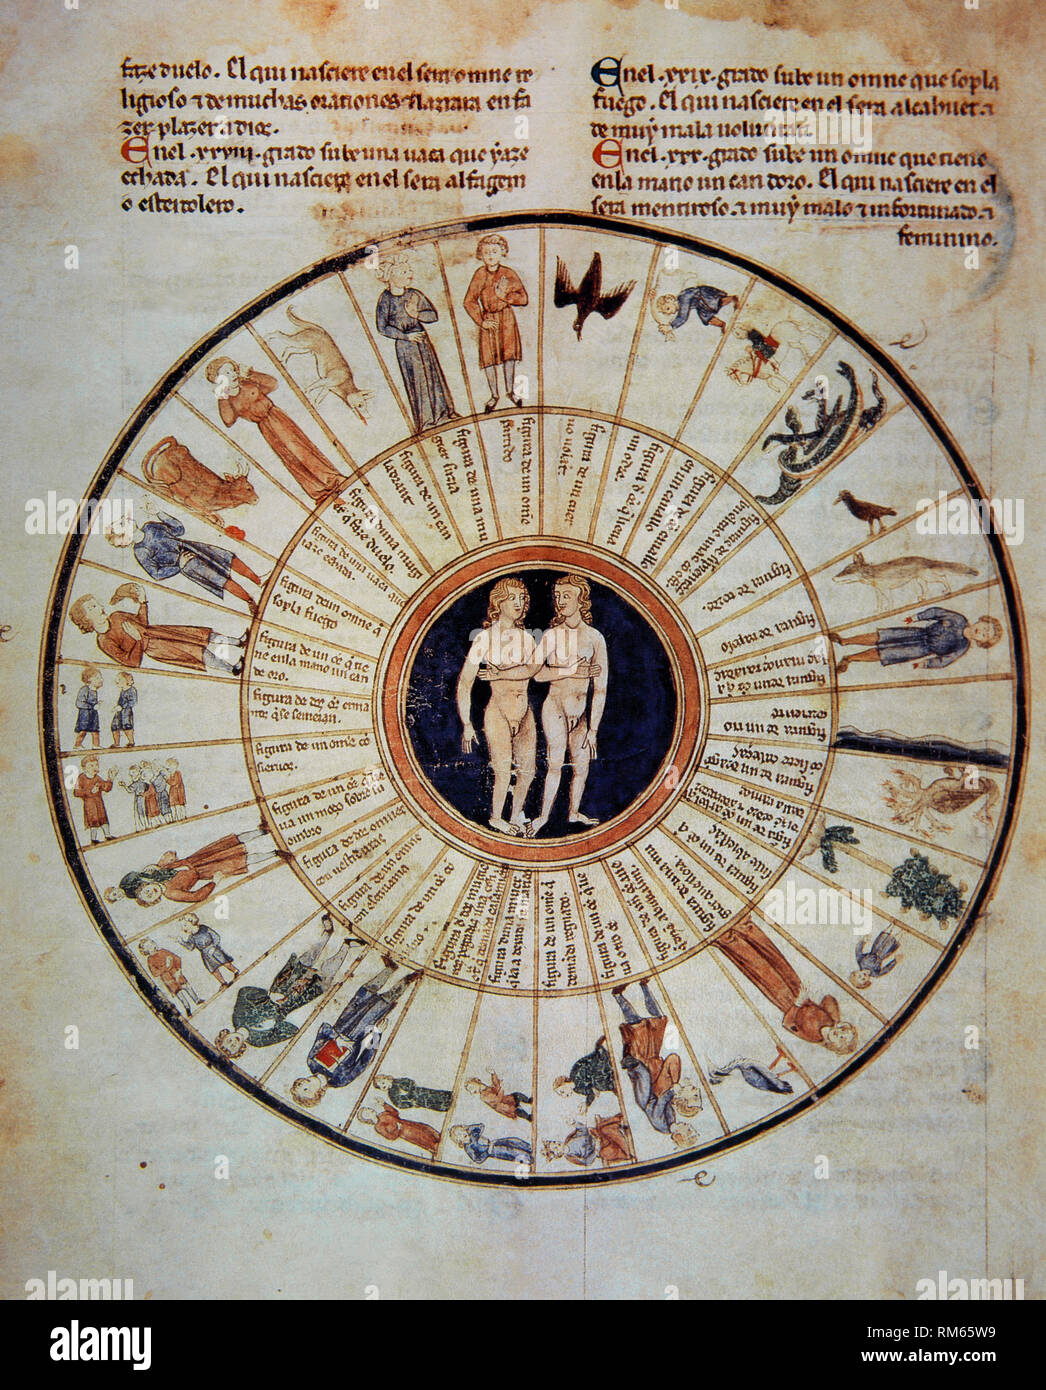 Astrological Treatise c. 1300. Manuscript (Reg. lat. 1283, fol 2v). The manuscript contains an astrological treatise translated to Spanish from an eleventh century Arabic text. Constellation of Gemini with Paranatellonta. Sign of Gemini is depicted in the centre surrounded by the constellations related to this zodiacal sign. Tratado de astrologia y magia, by Alfonso X el Sabio. Vatican Library, Vatican City. Stock Photo